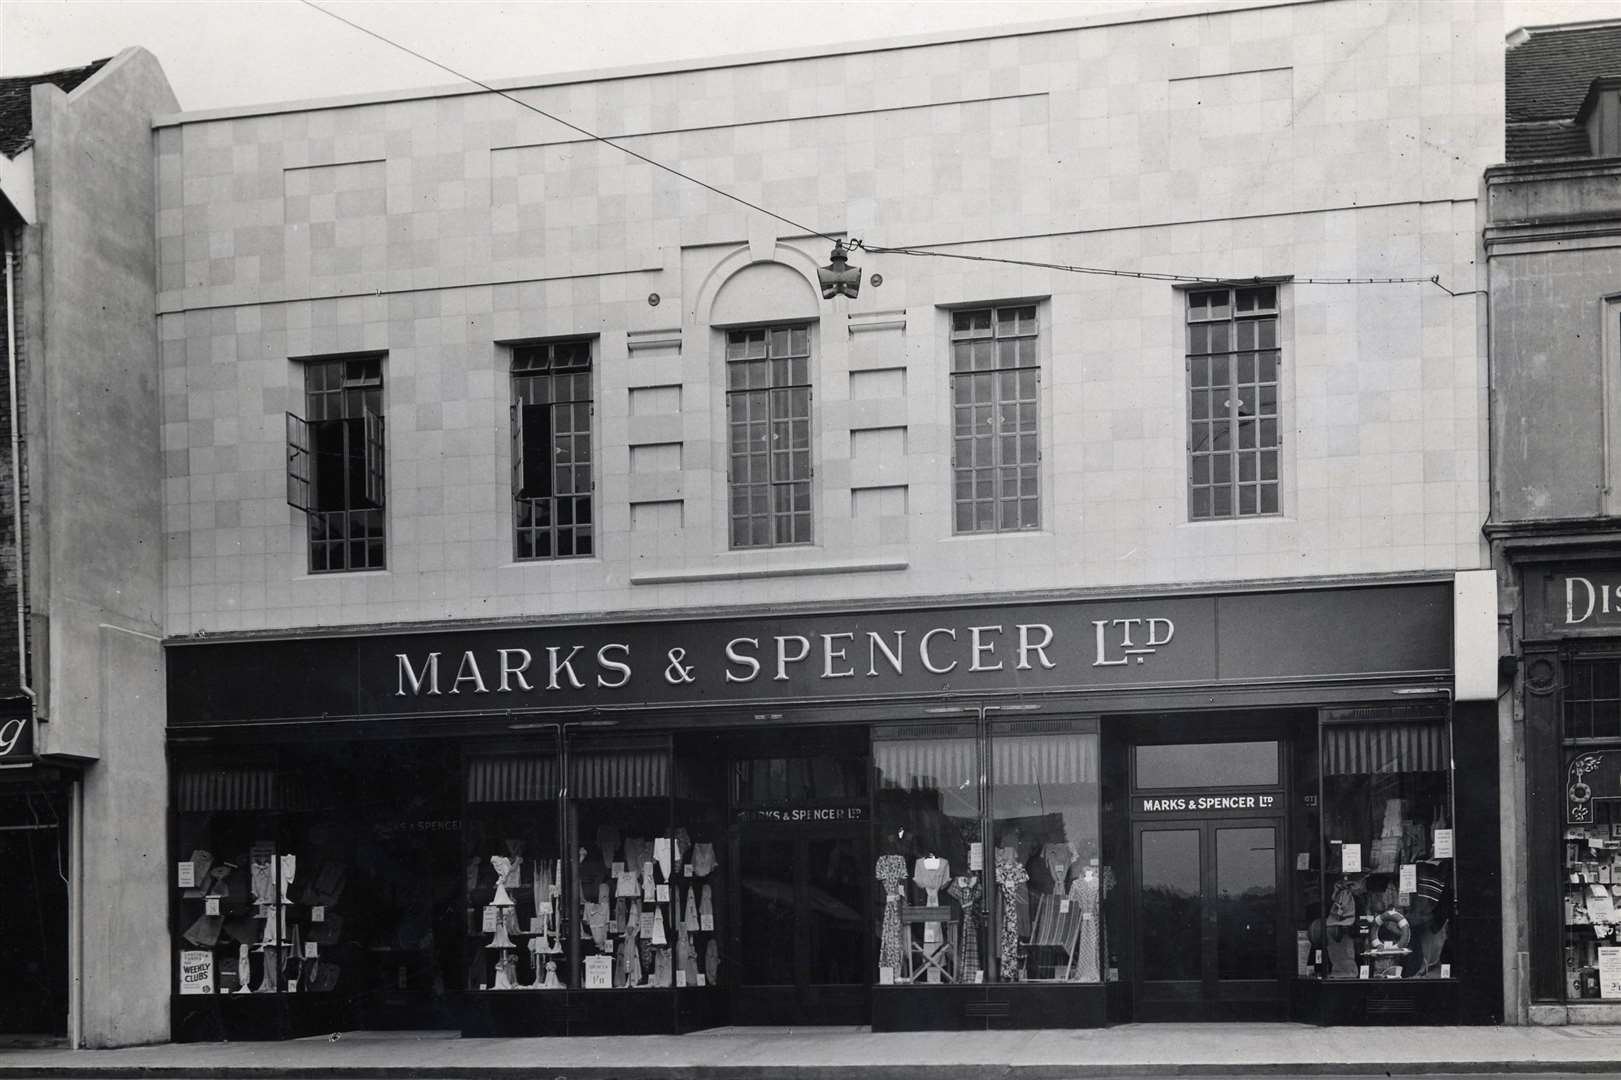 Marks & Spencer at Week Street, Maidstone in 1935. Credit: The Marks and Spencer Company